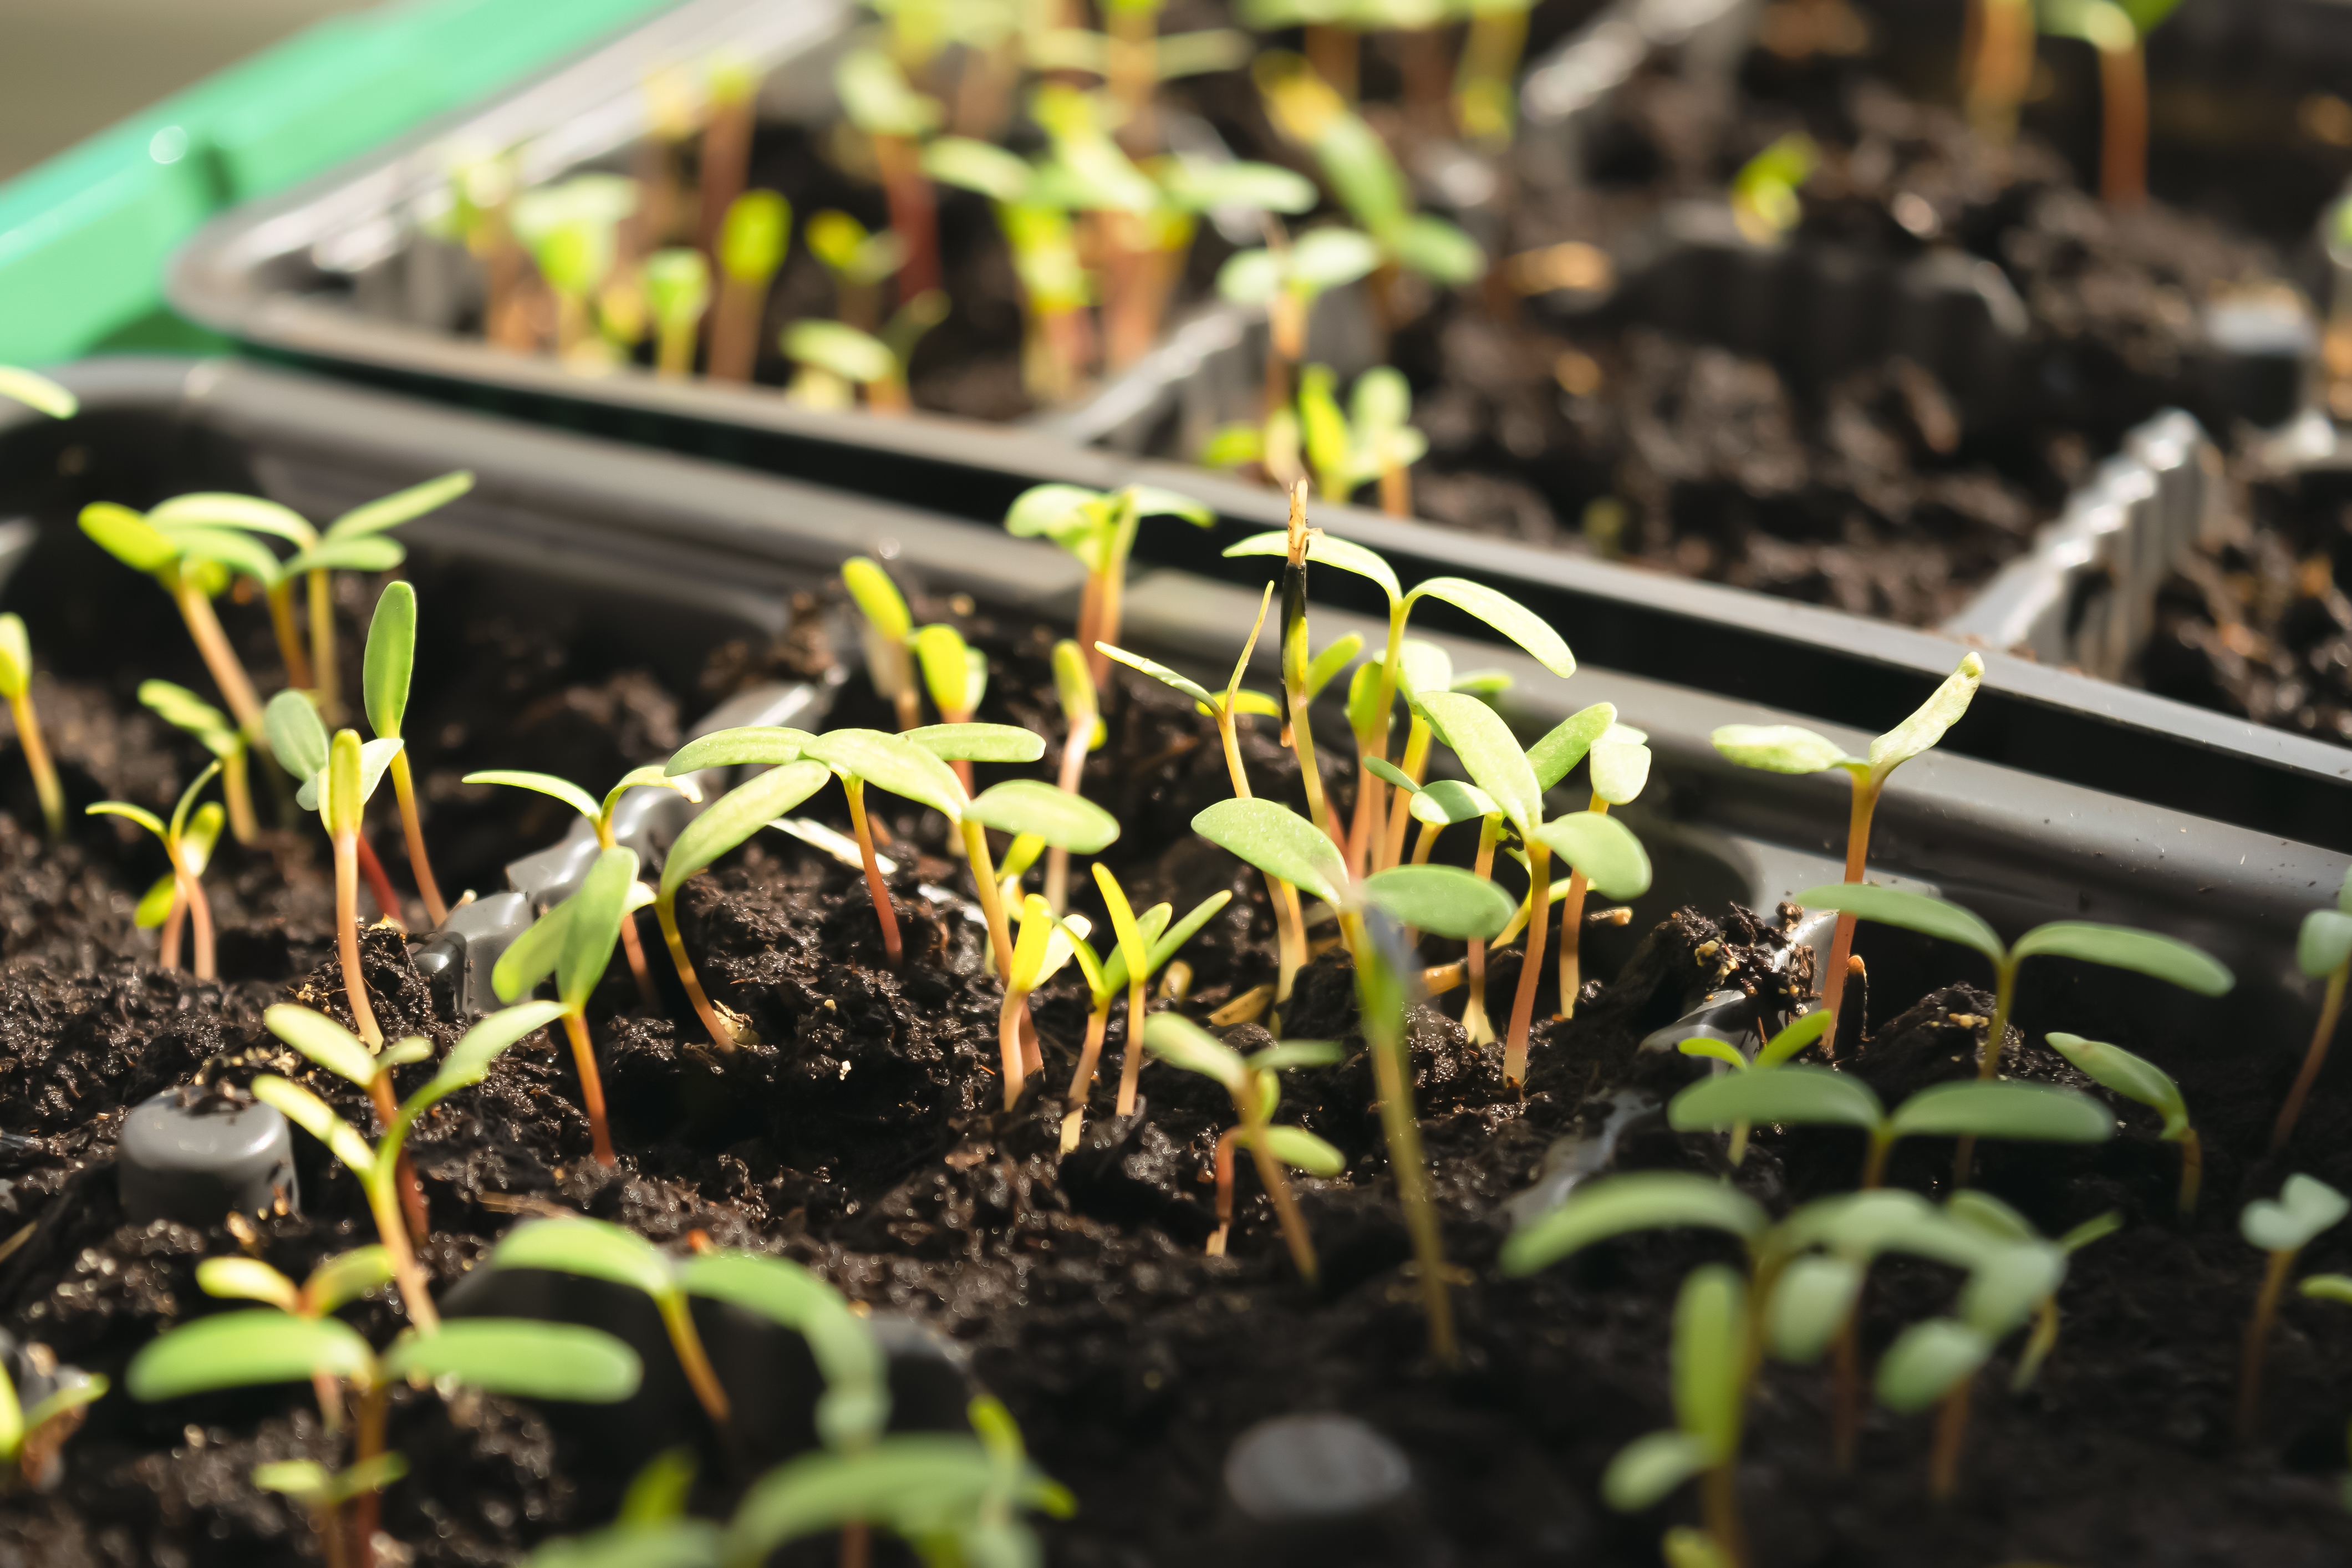 Young flower seedlings illuminated by a bright sunbeam, growing in a container with fertile soil.